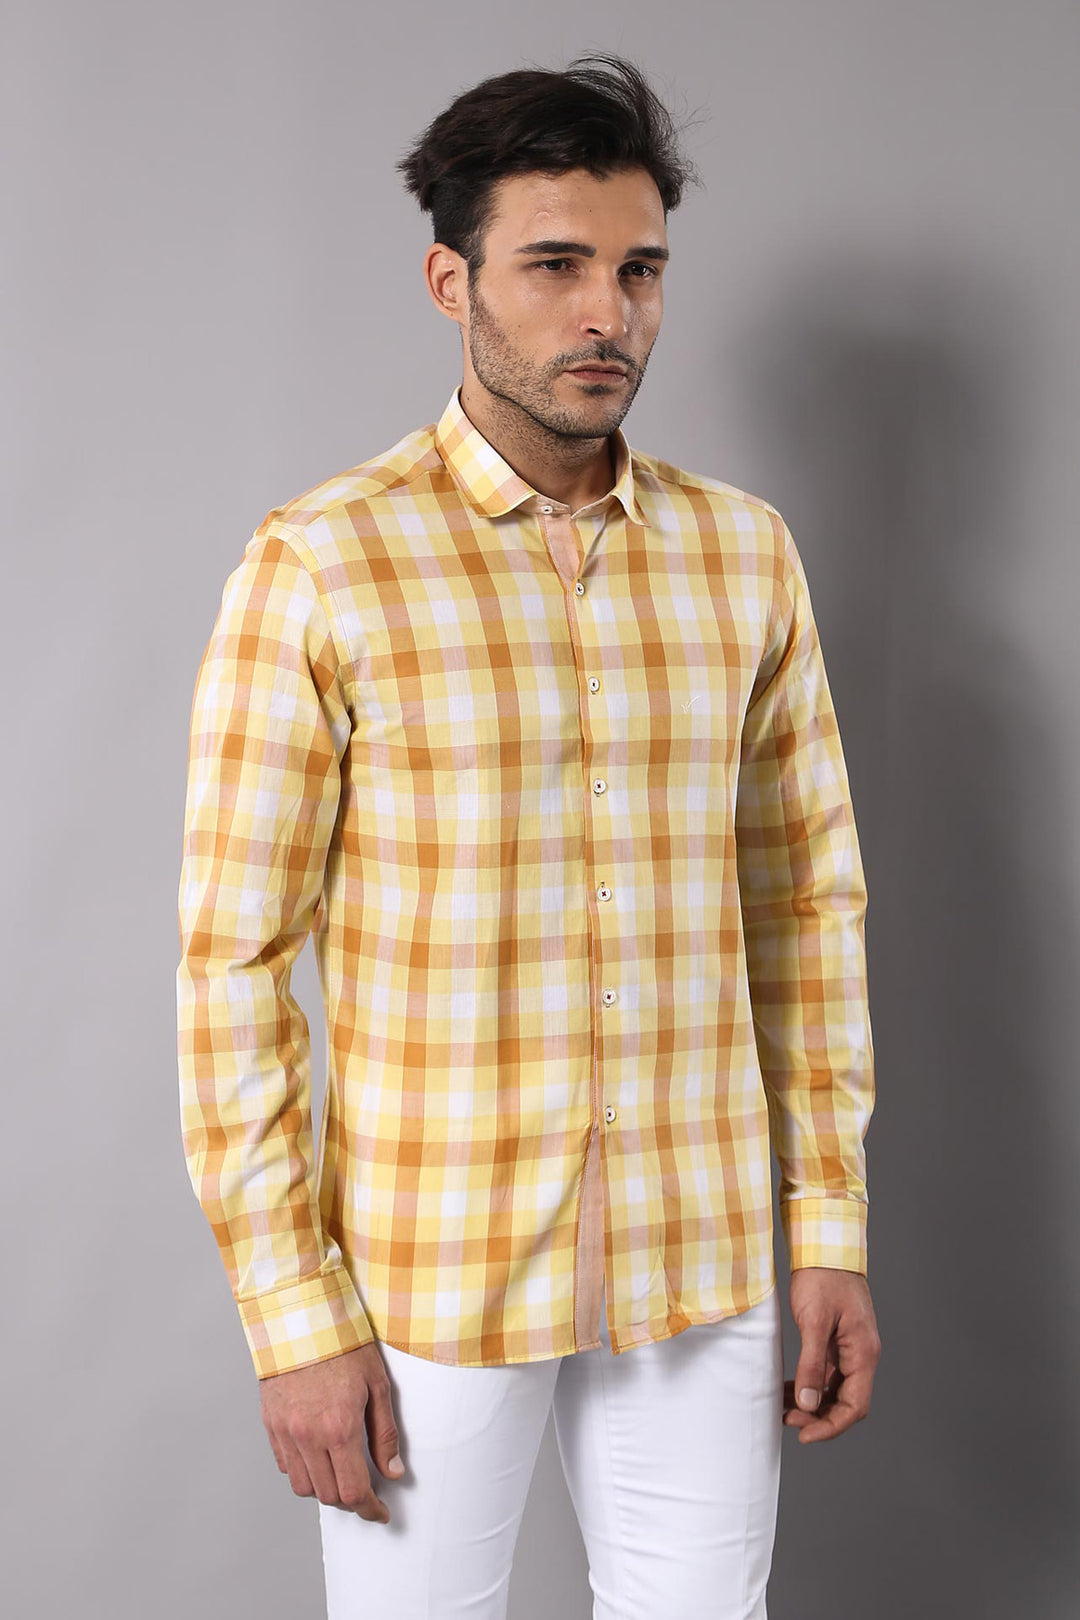 Slim Fit Plaid Patterned Yellow Shirt - Wessi